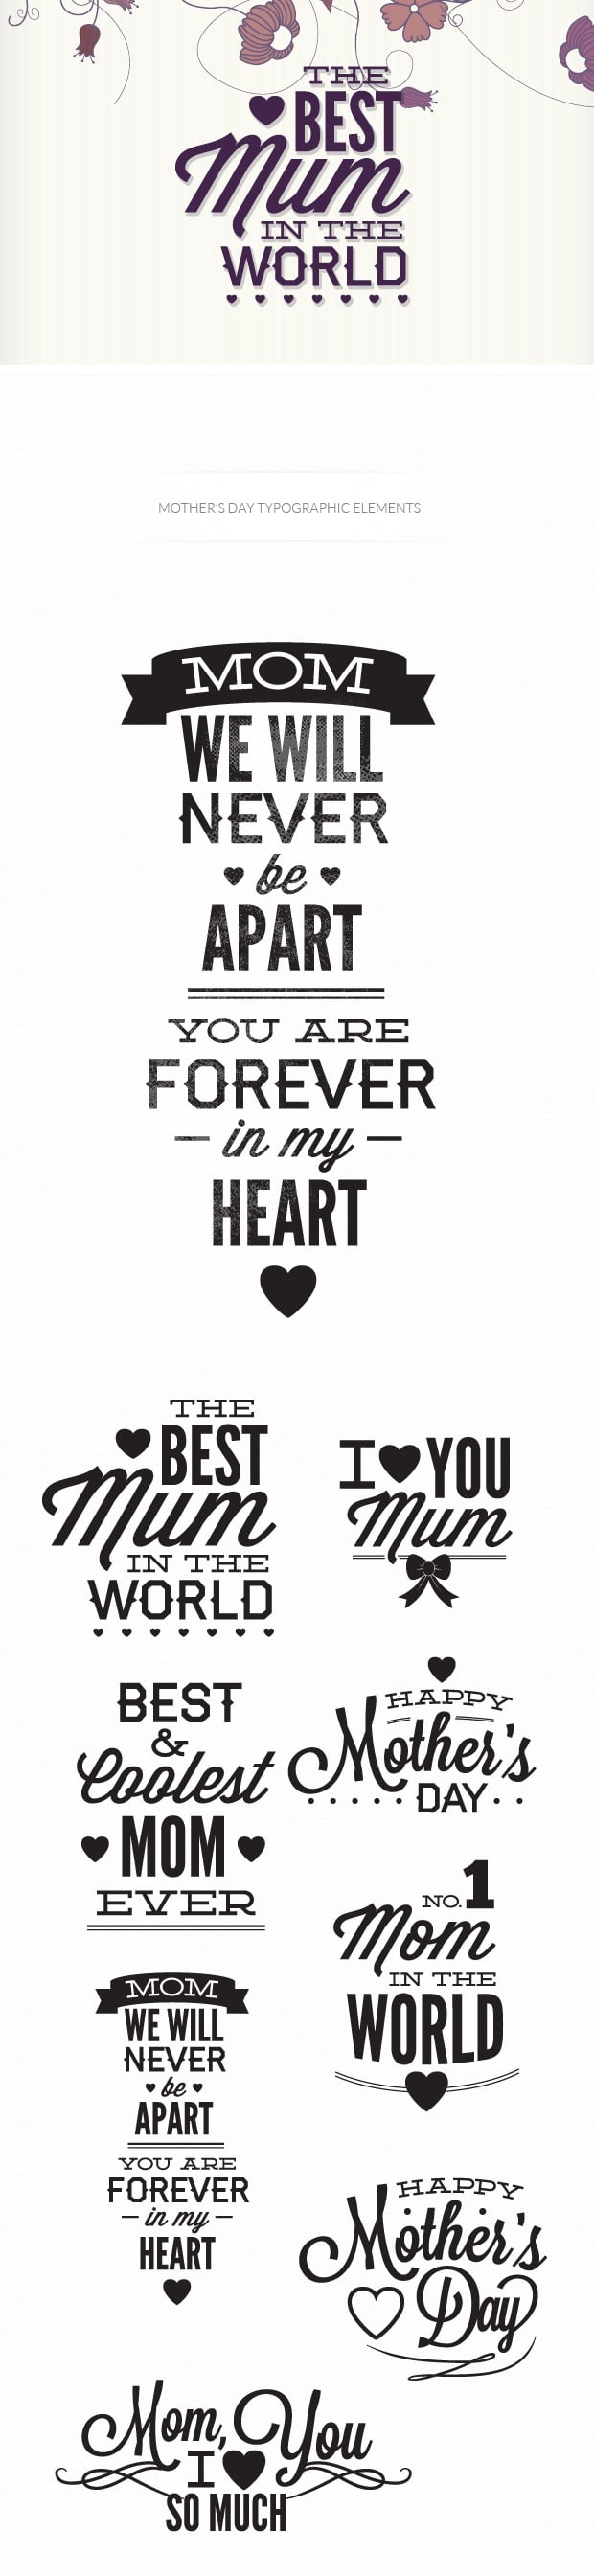 Mother's day typographic elements 6